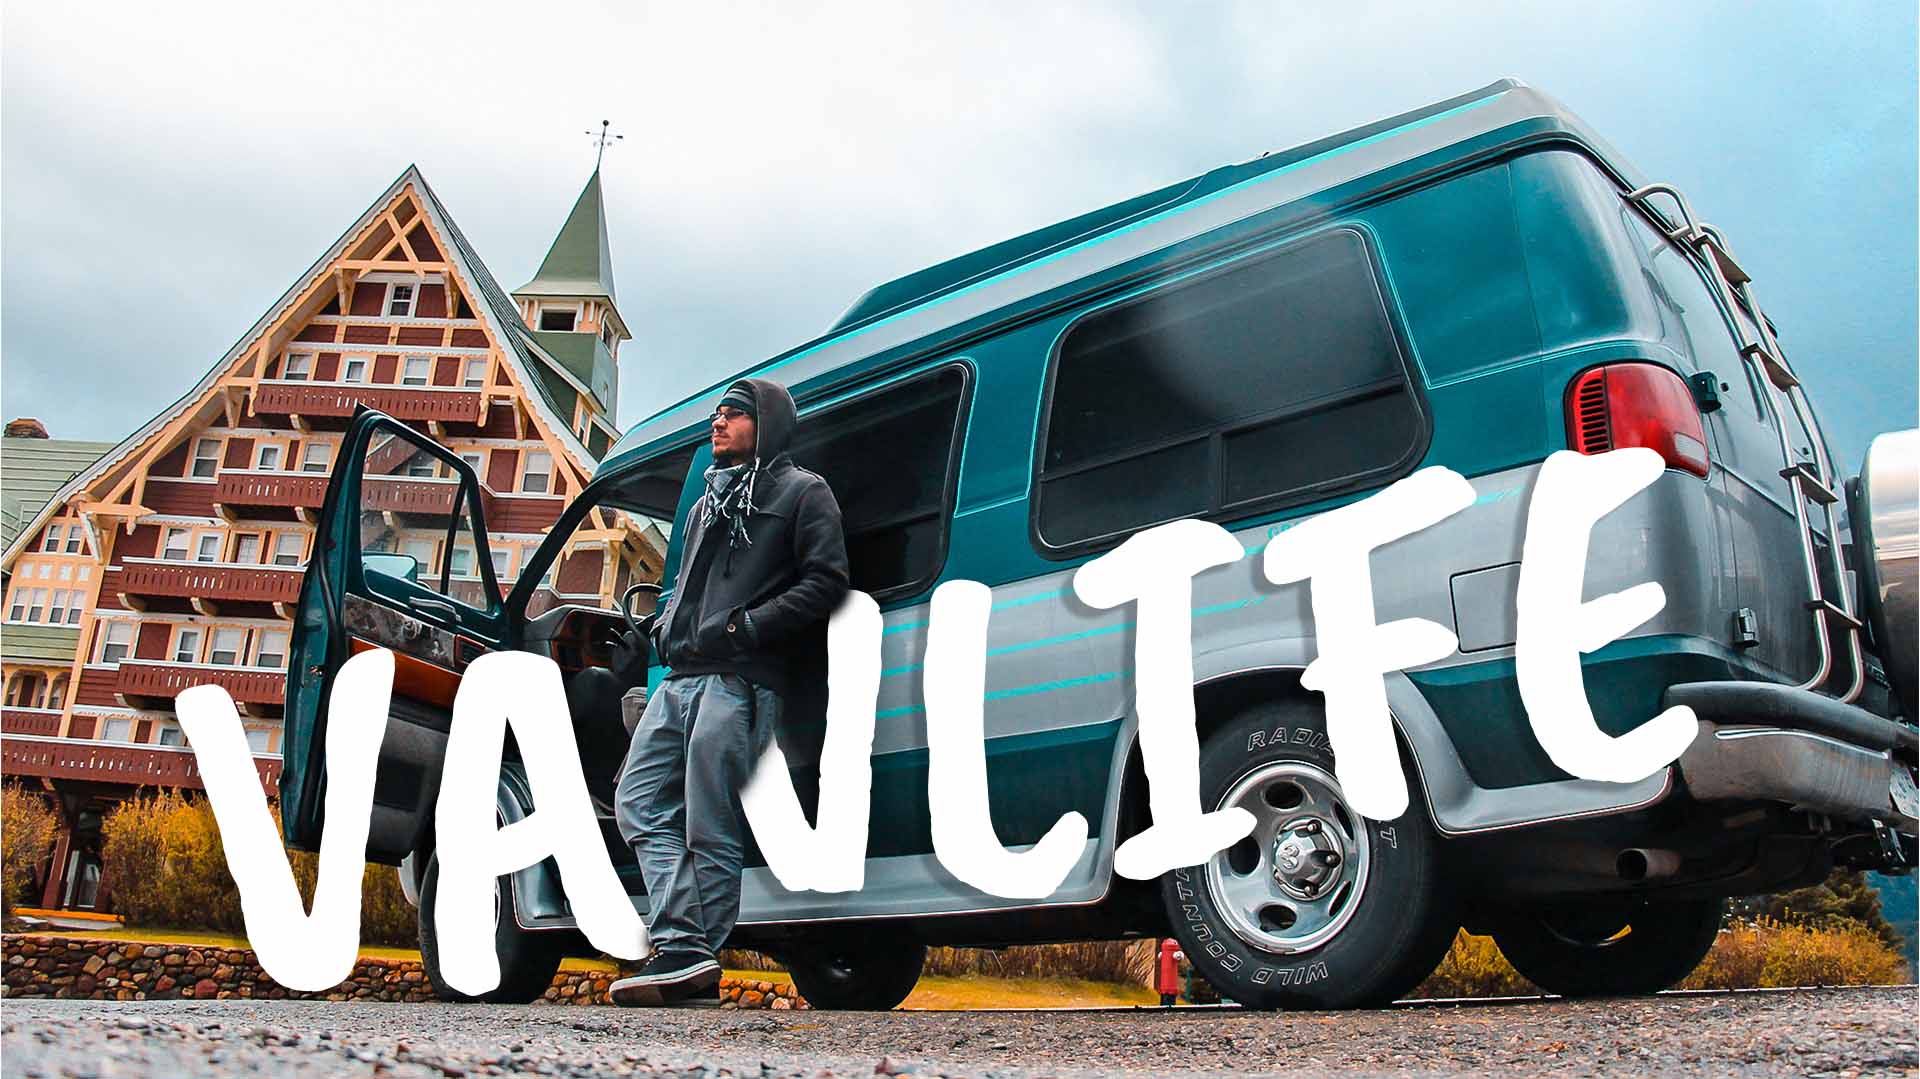 Vanlife top 10 Tipps - Cover